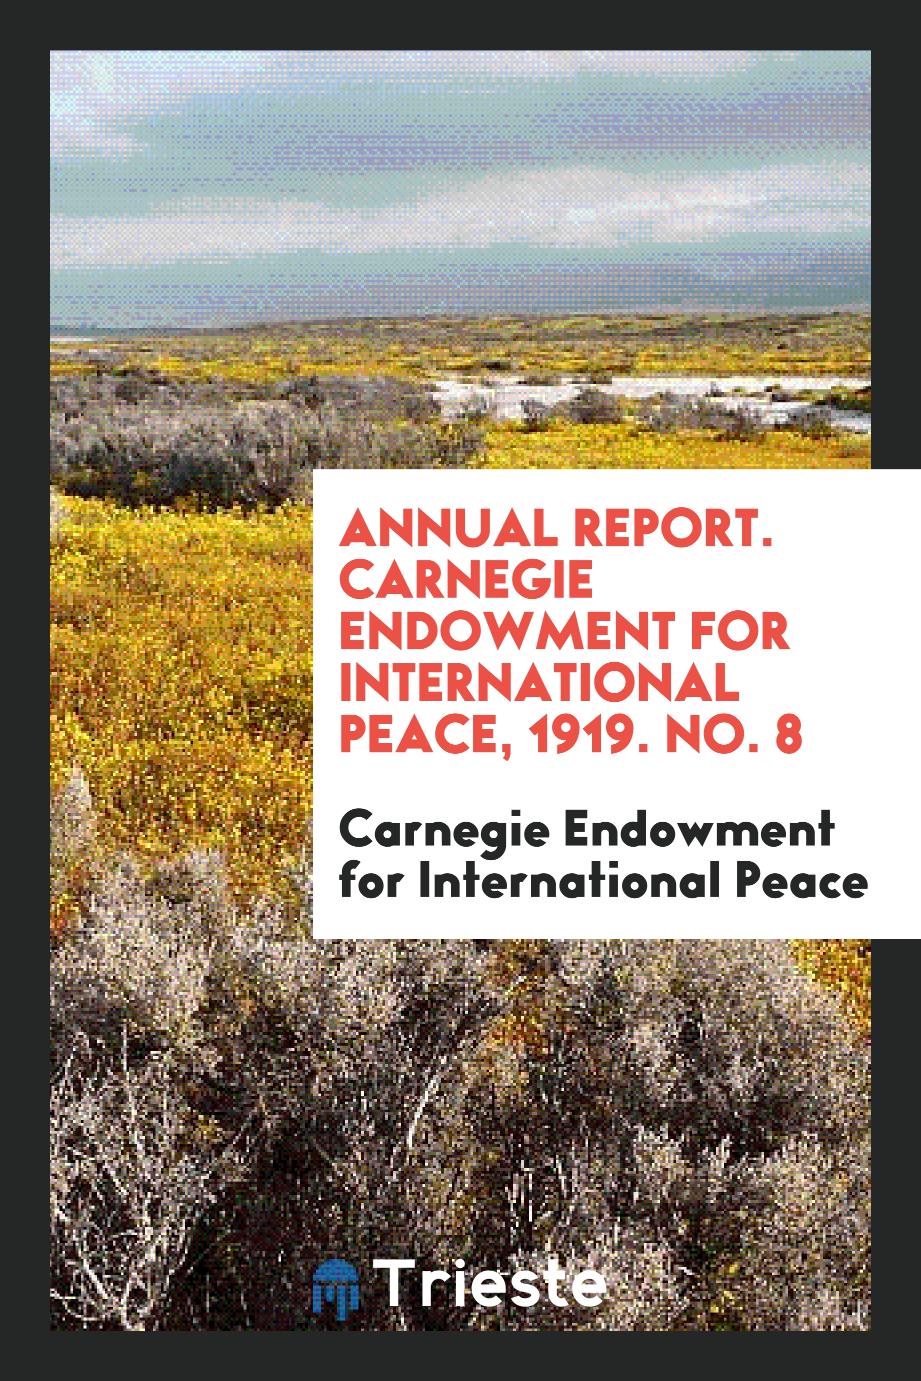 Annual Report. Carnegie Endowment for International Peace, 1919. No. 8